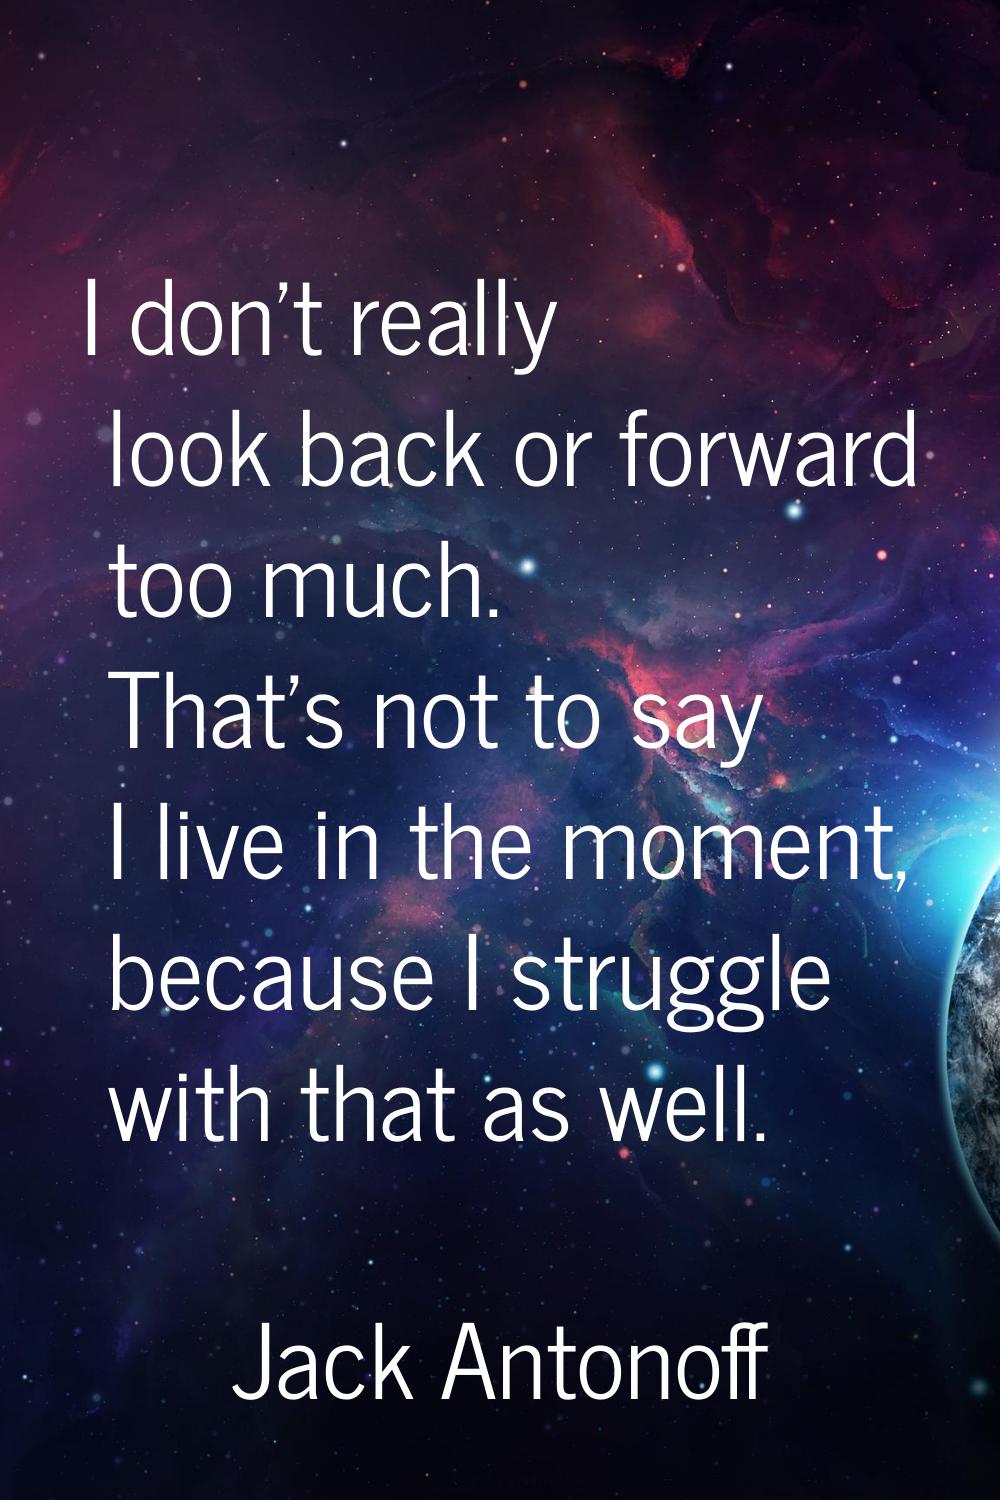 I don't really look back or forward too much. That's not to say I live in the moment, because I str